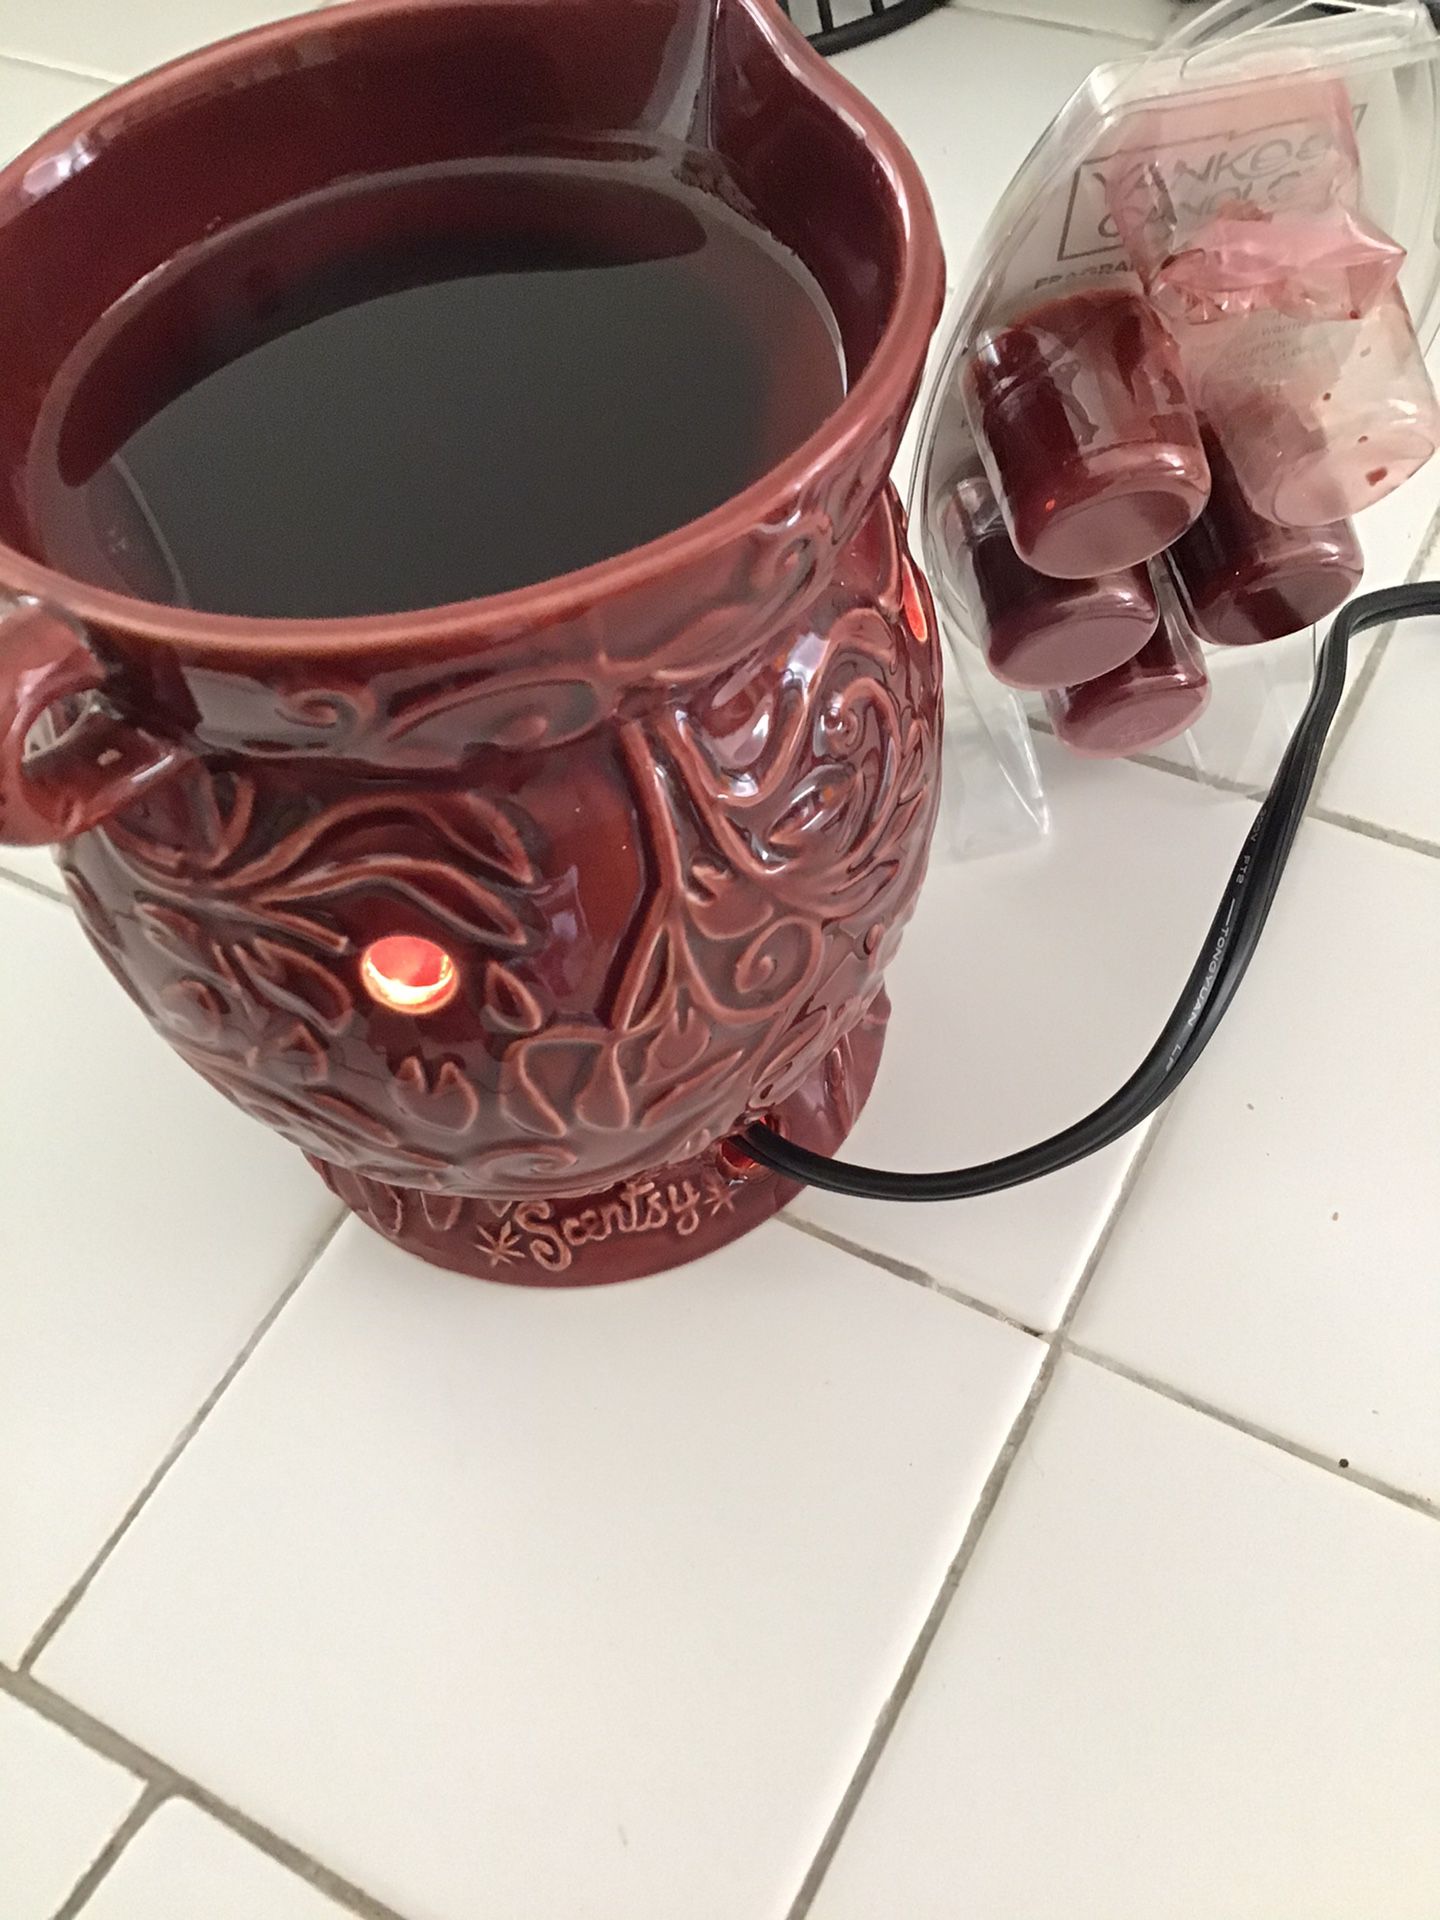 Scentsy warmer plug in with yankee candle wax $12 like new